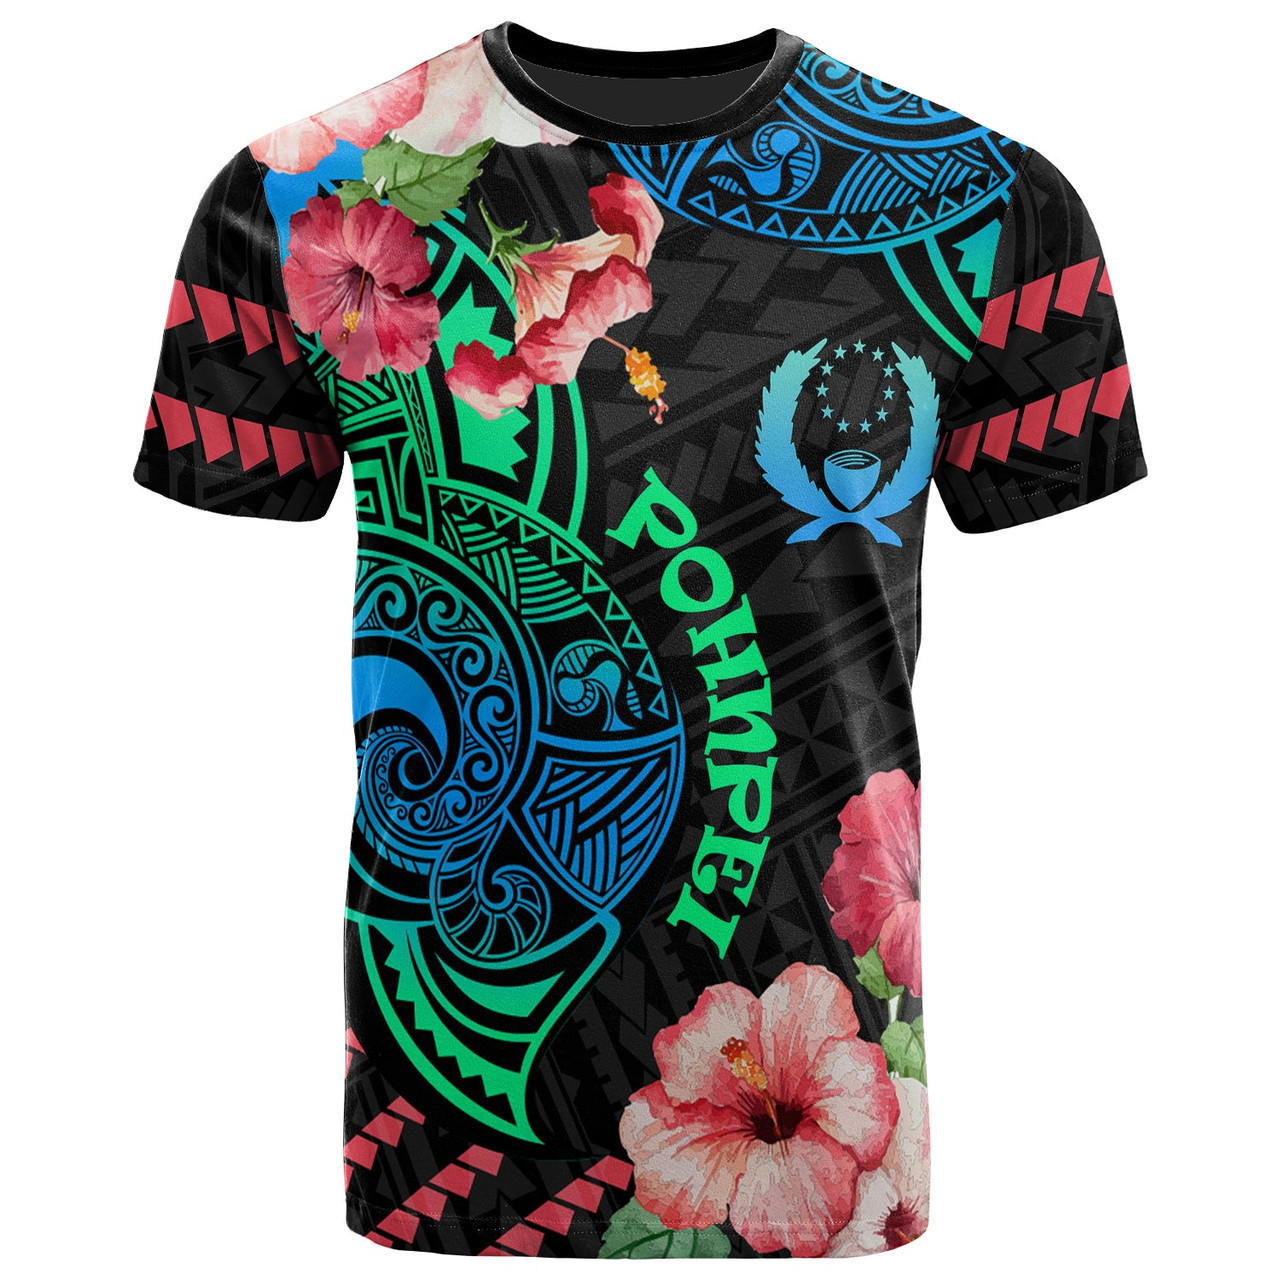 Pohnpei T-Shirt - Polynesian Pride with Hibicus Flower Tribal Pattern